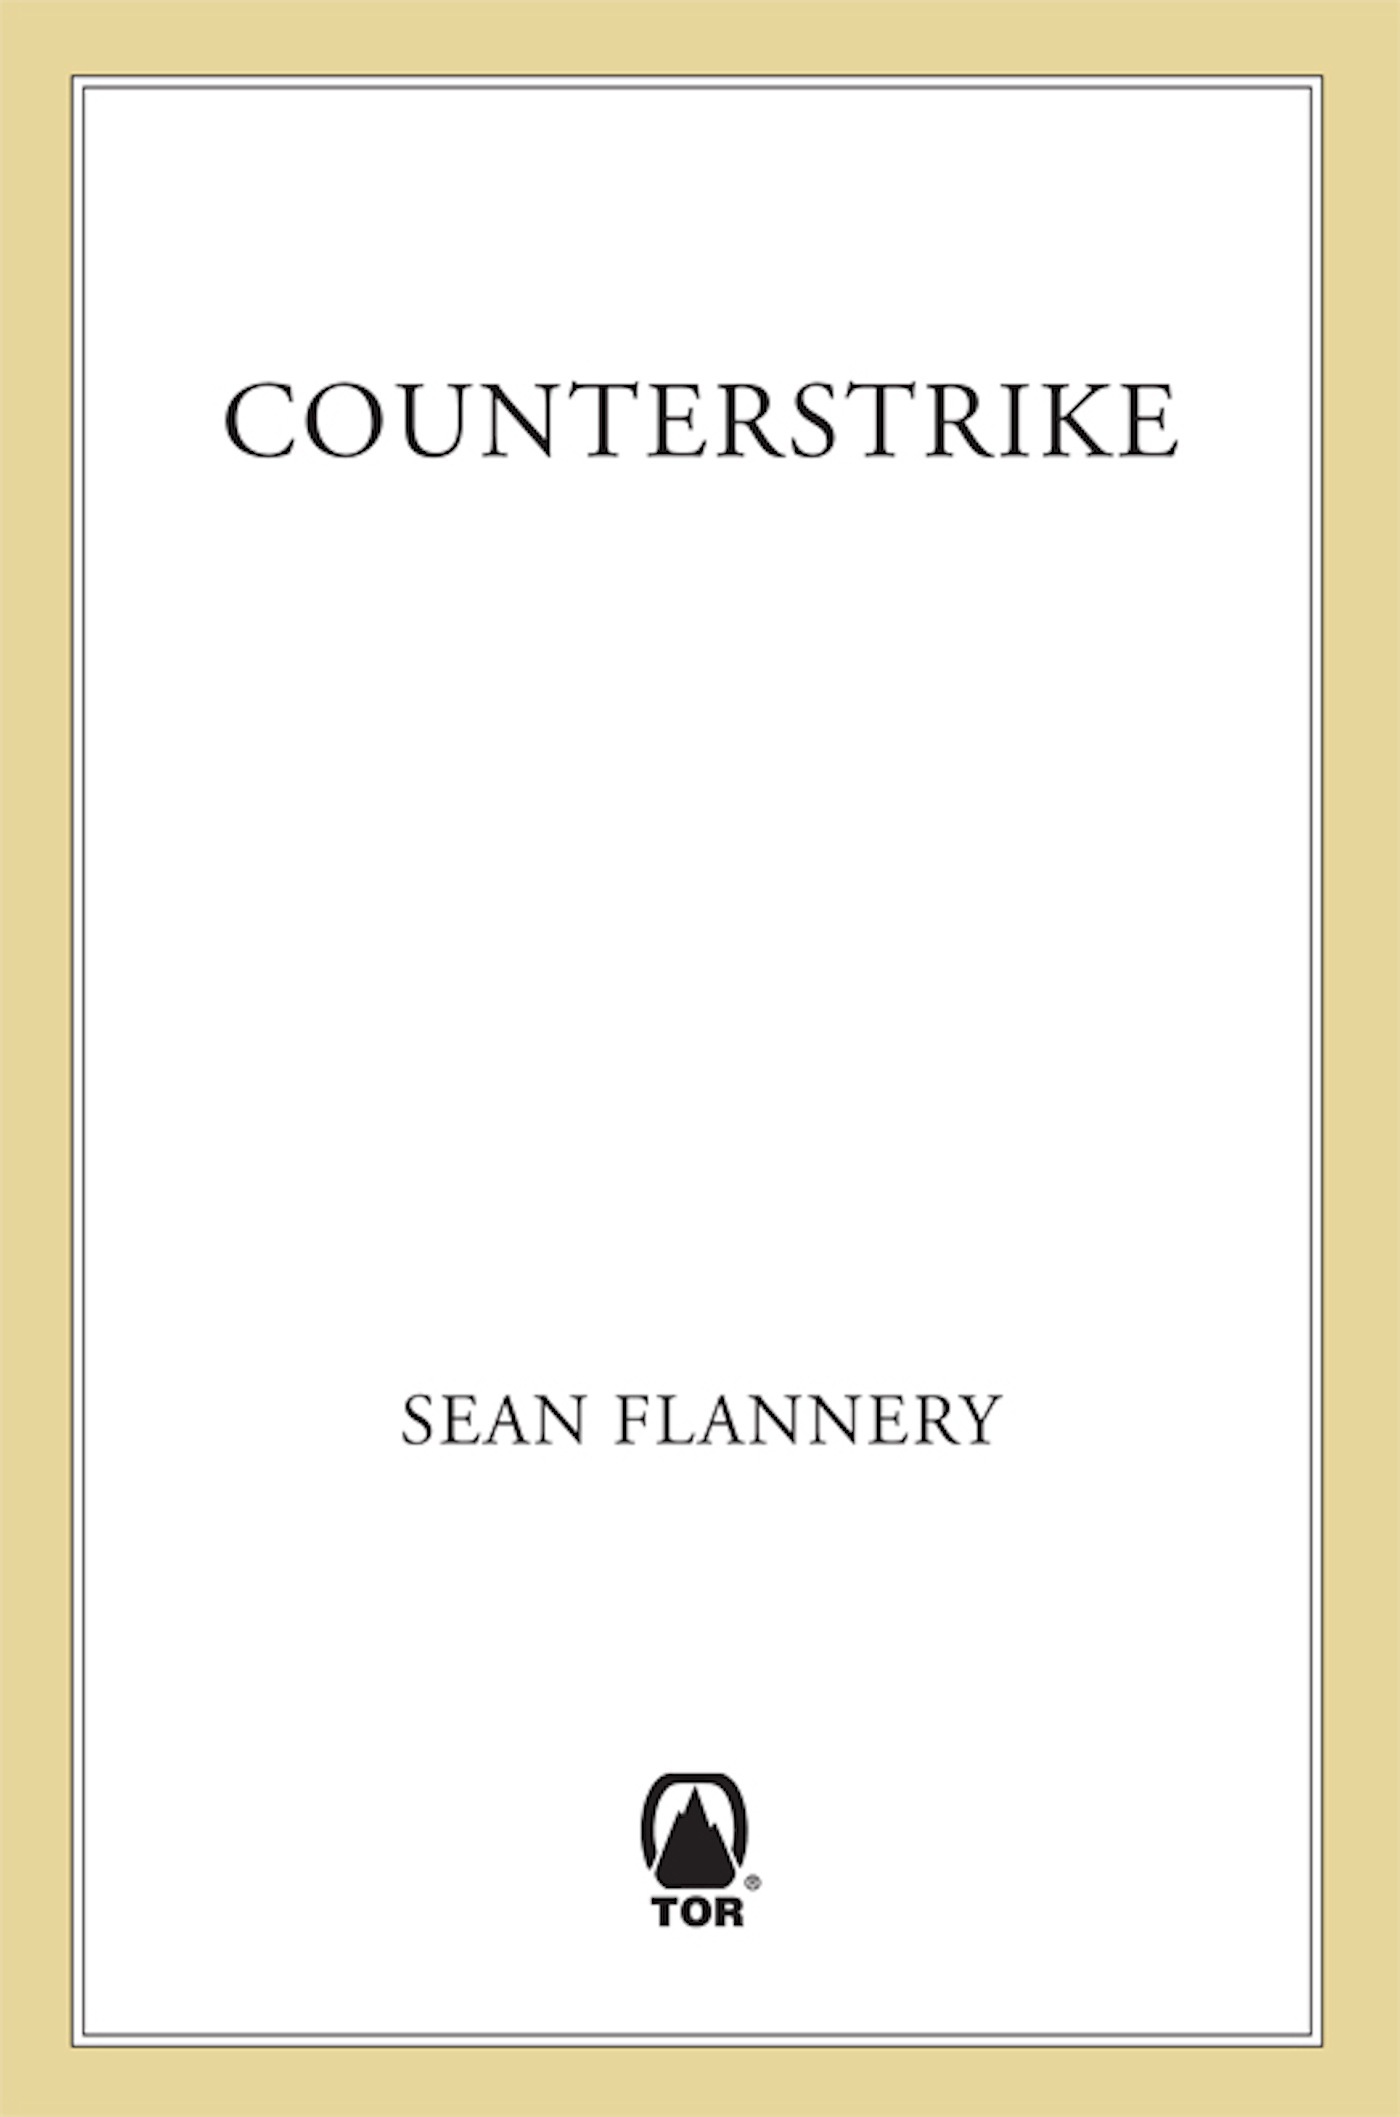 Counterstrike by Sean Flannery